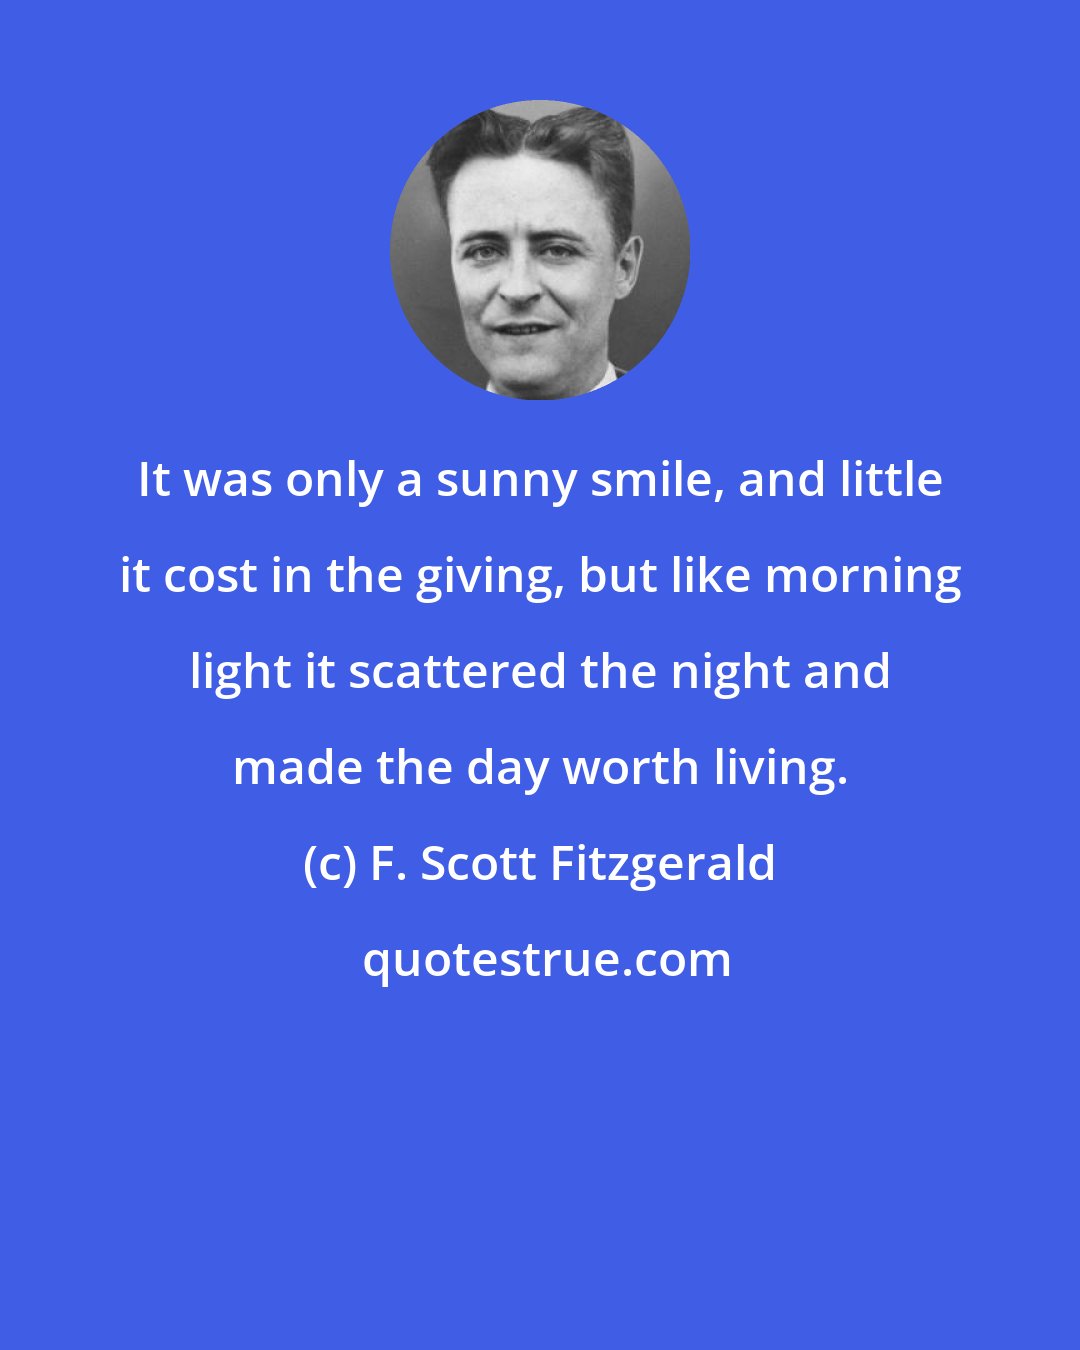 F. Scott Fitzgerald: It was only a sunny smile, and little it cost in the giving, but like morning light it scattered the night and made the day worth living.